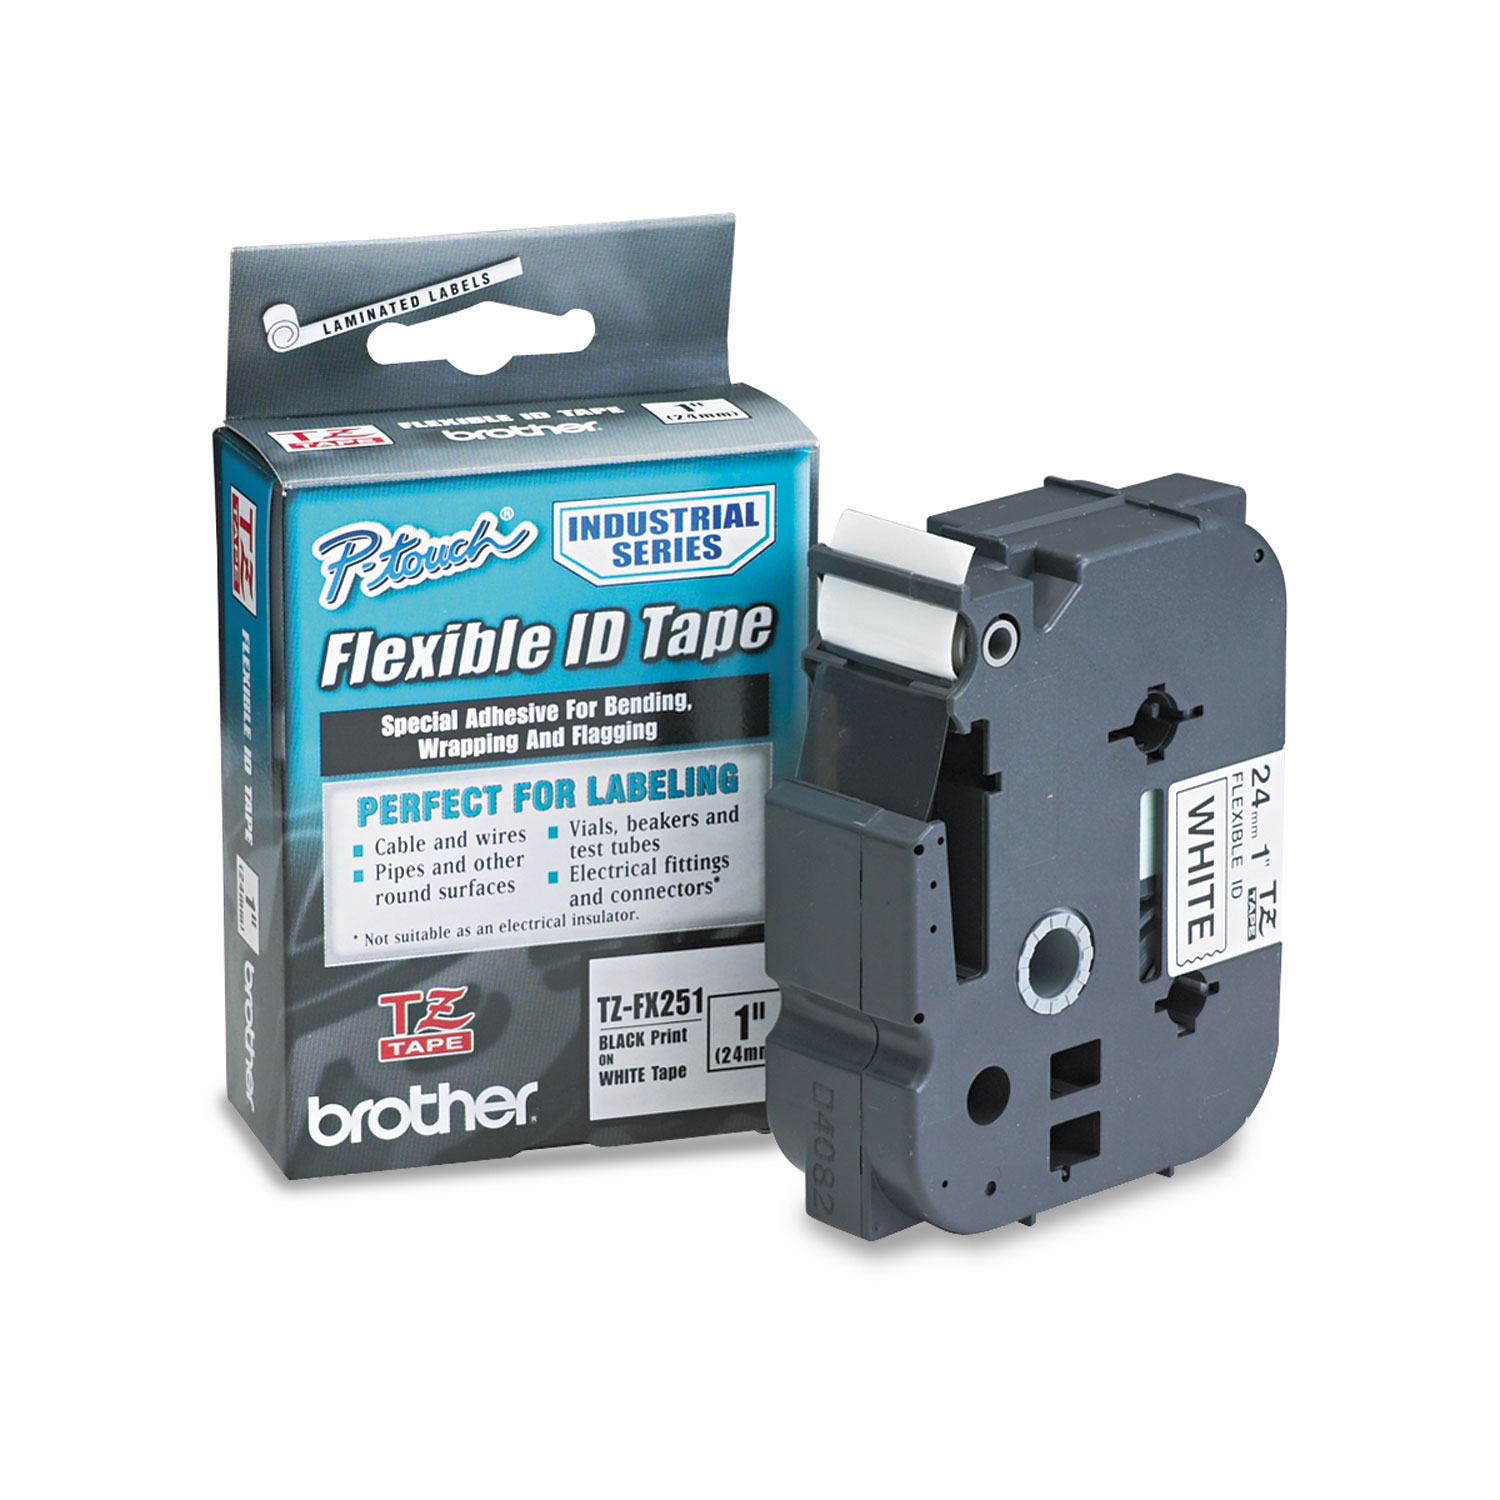  Brother P-Touch TZEFX251 TZe Flexible Tape Cartridge for P-Touch Labelers, 0.94 x 26.2 ft, Black on White (BRTTZEFX251) 